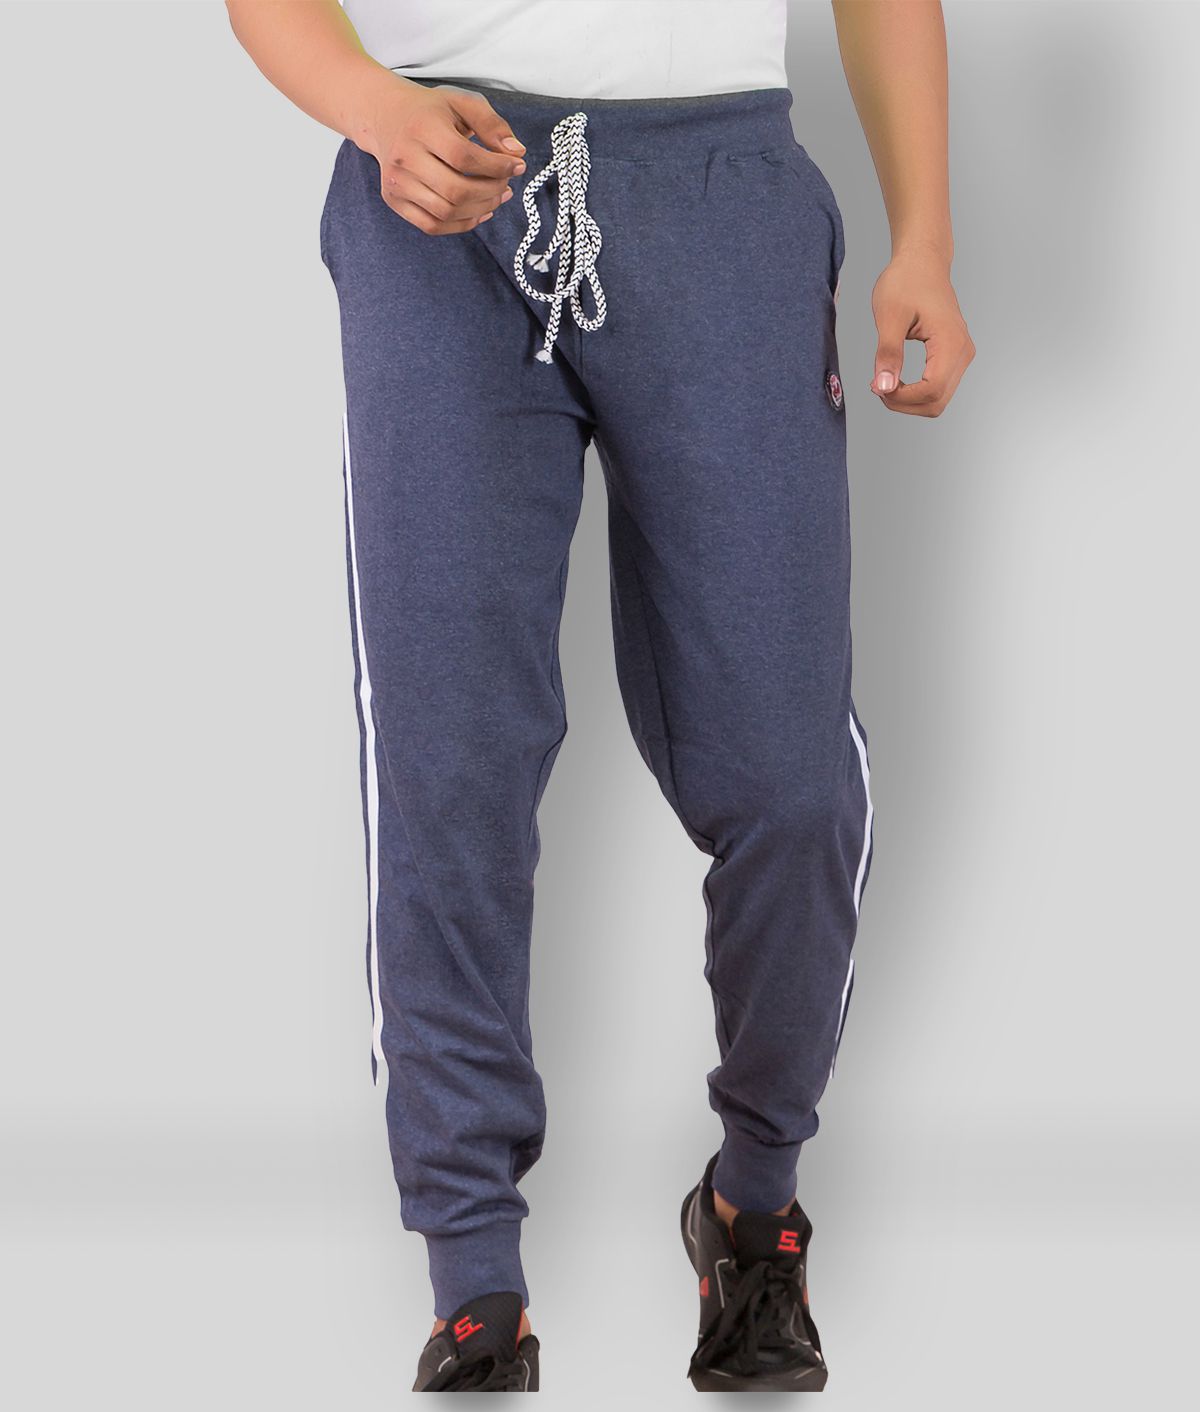     			Todd N Teen - Blue Cotton Men's Sports Joggers ( Pack of 1 )